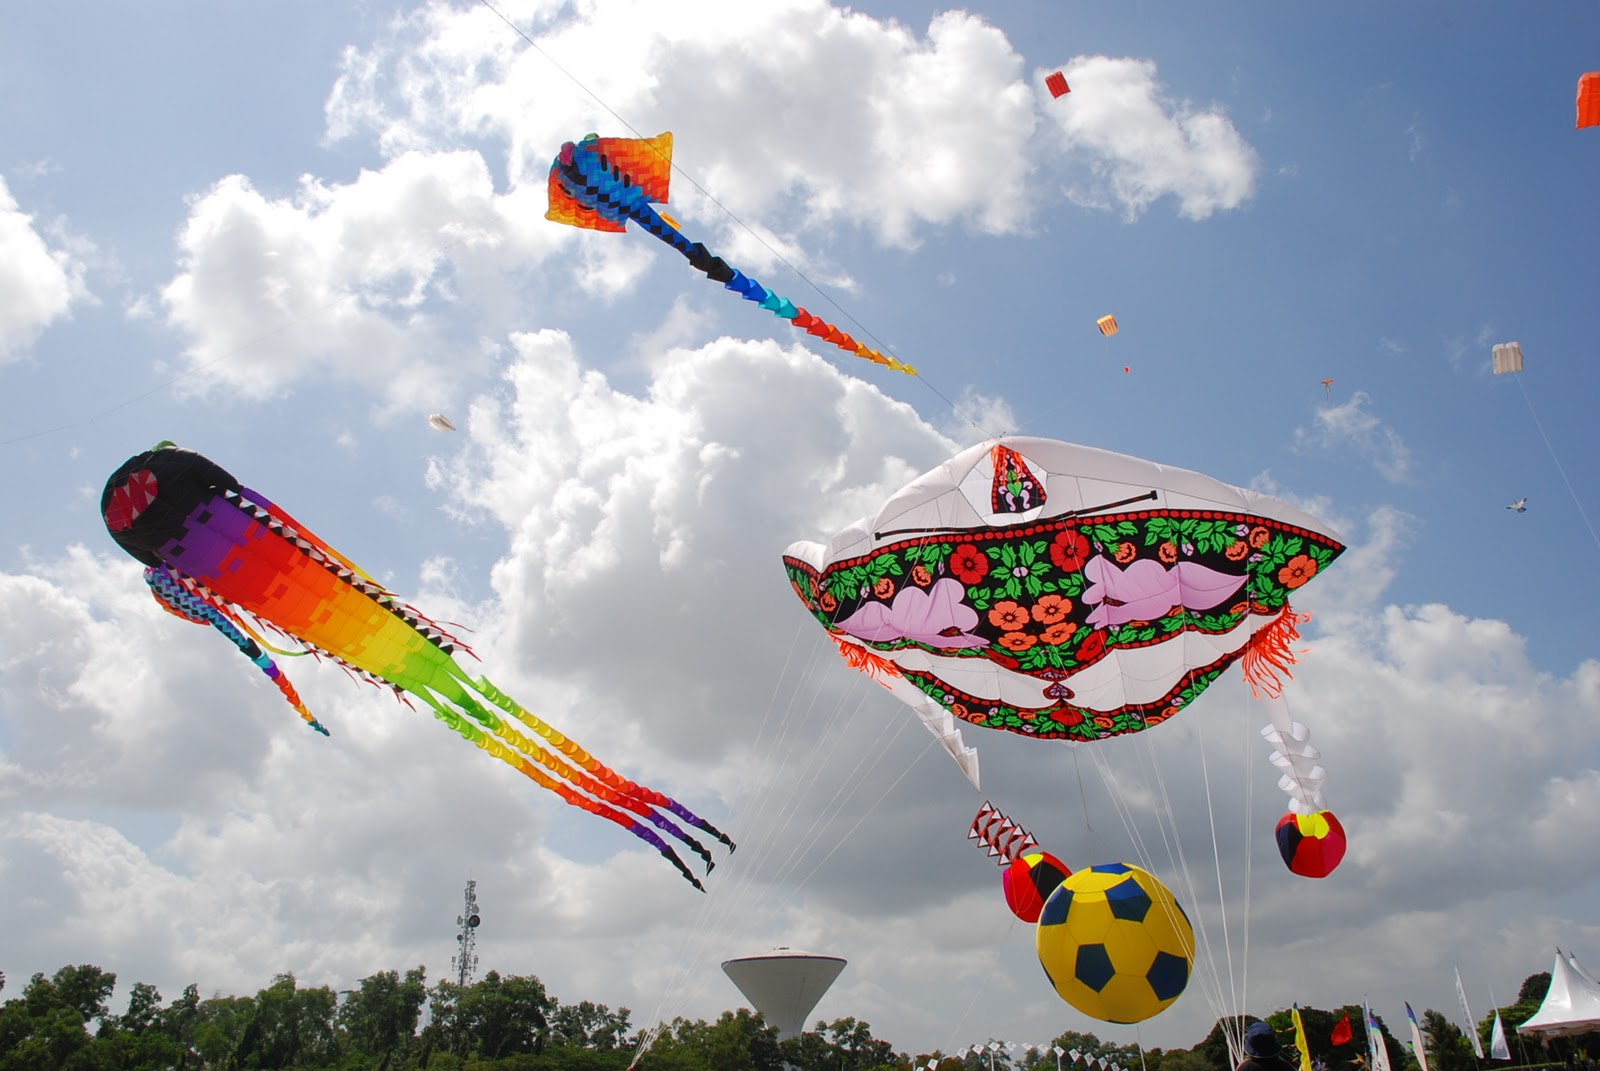 Kite flying in various shapes.